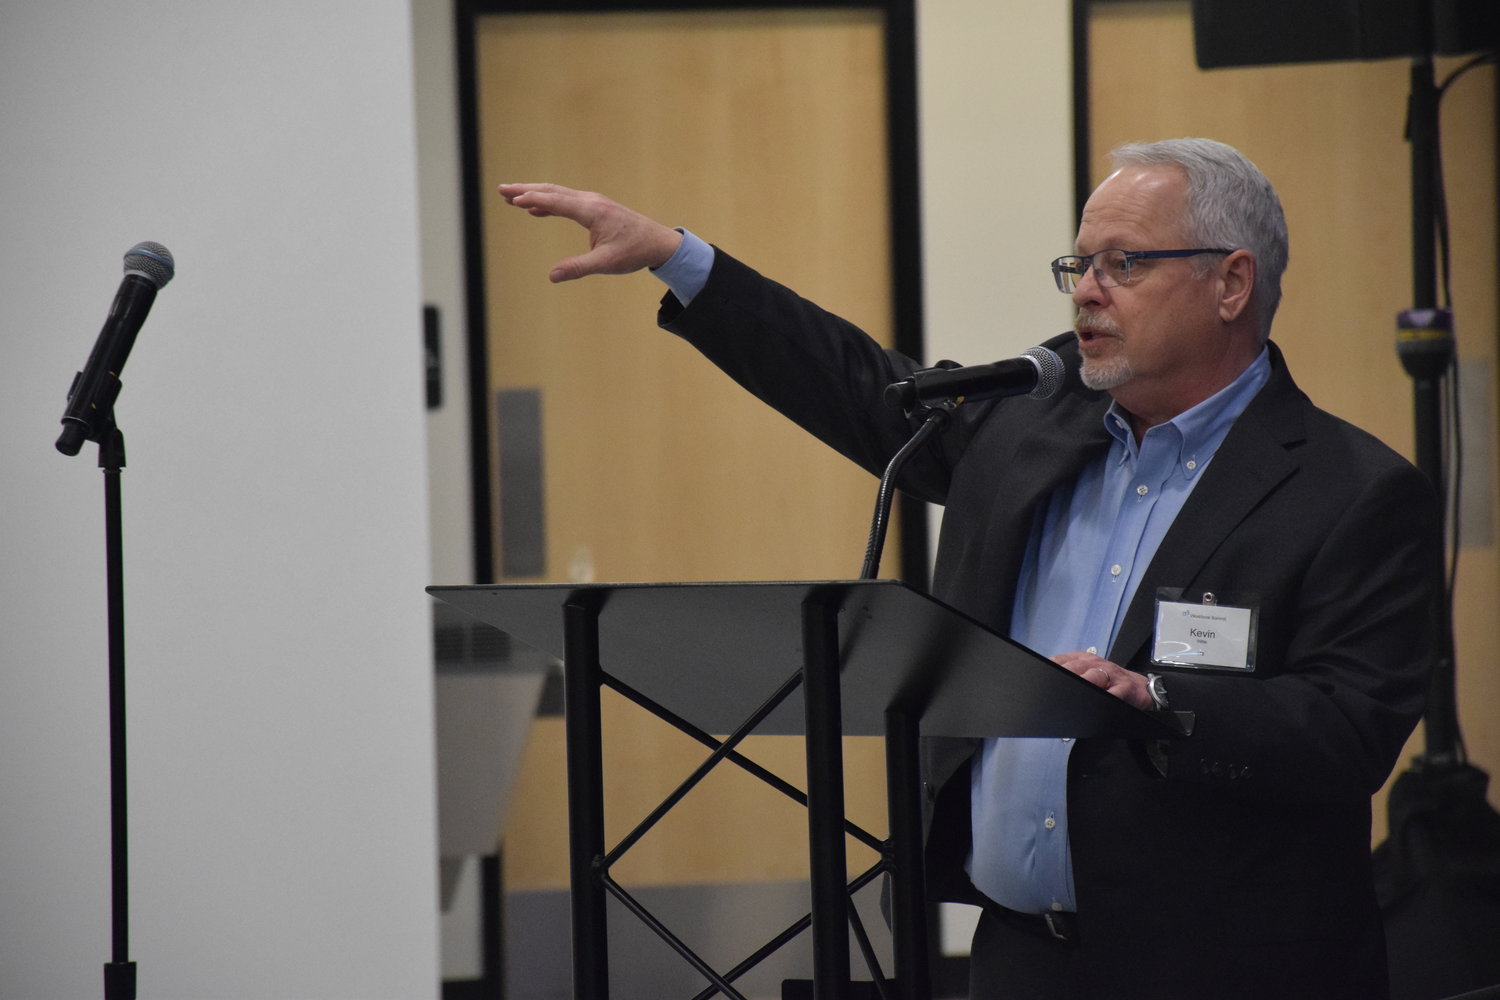 IT3 Innovation Center CEO Kevin Witte speaks to those gathered for a “Manufacturing Workforce Summit” at the recently-opened center in Ridgefield on Feb. 22.